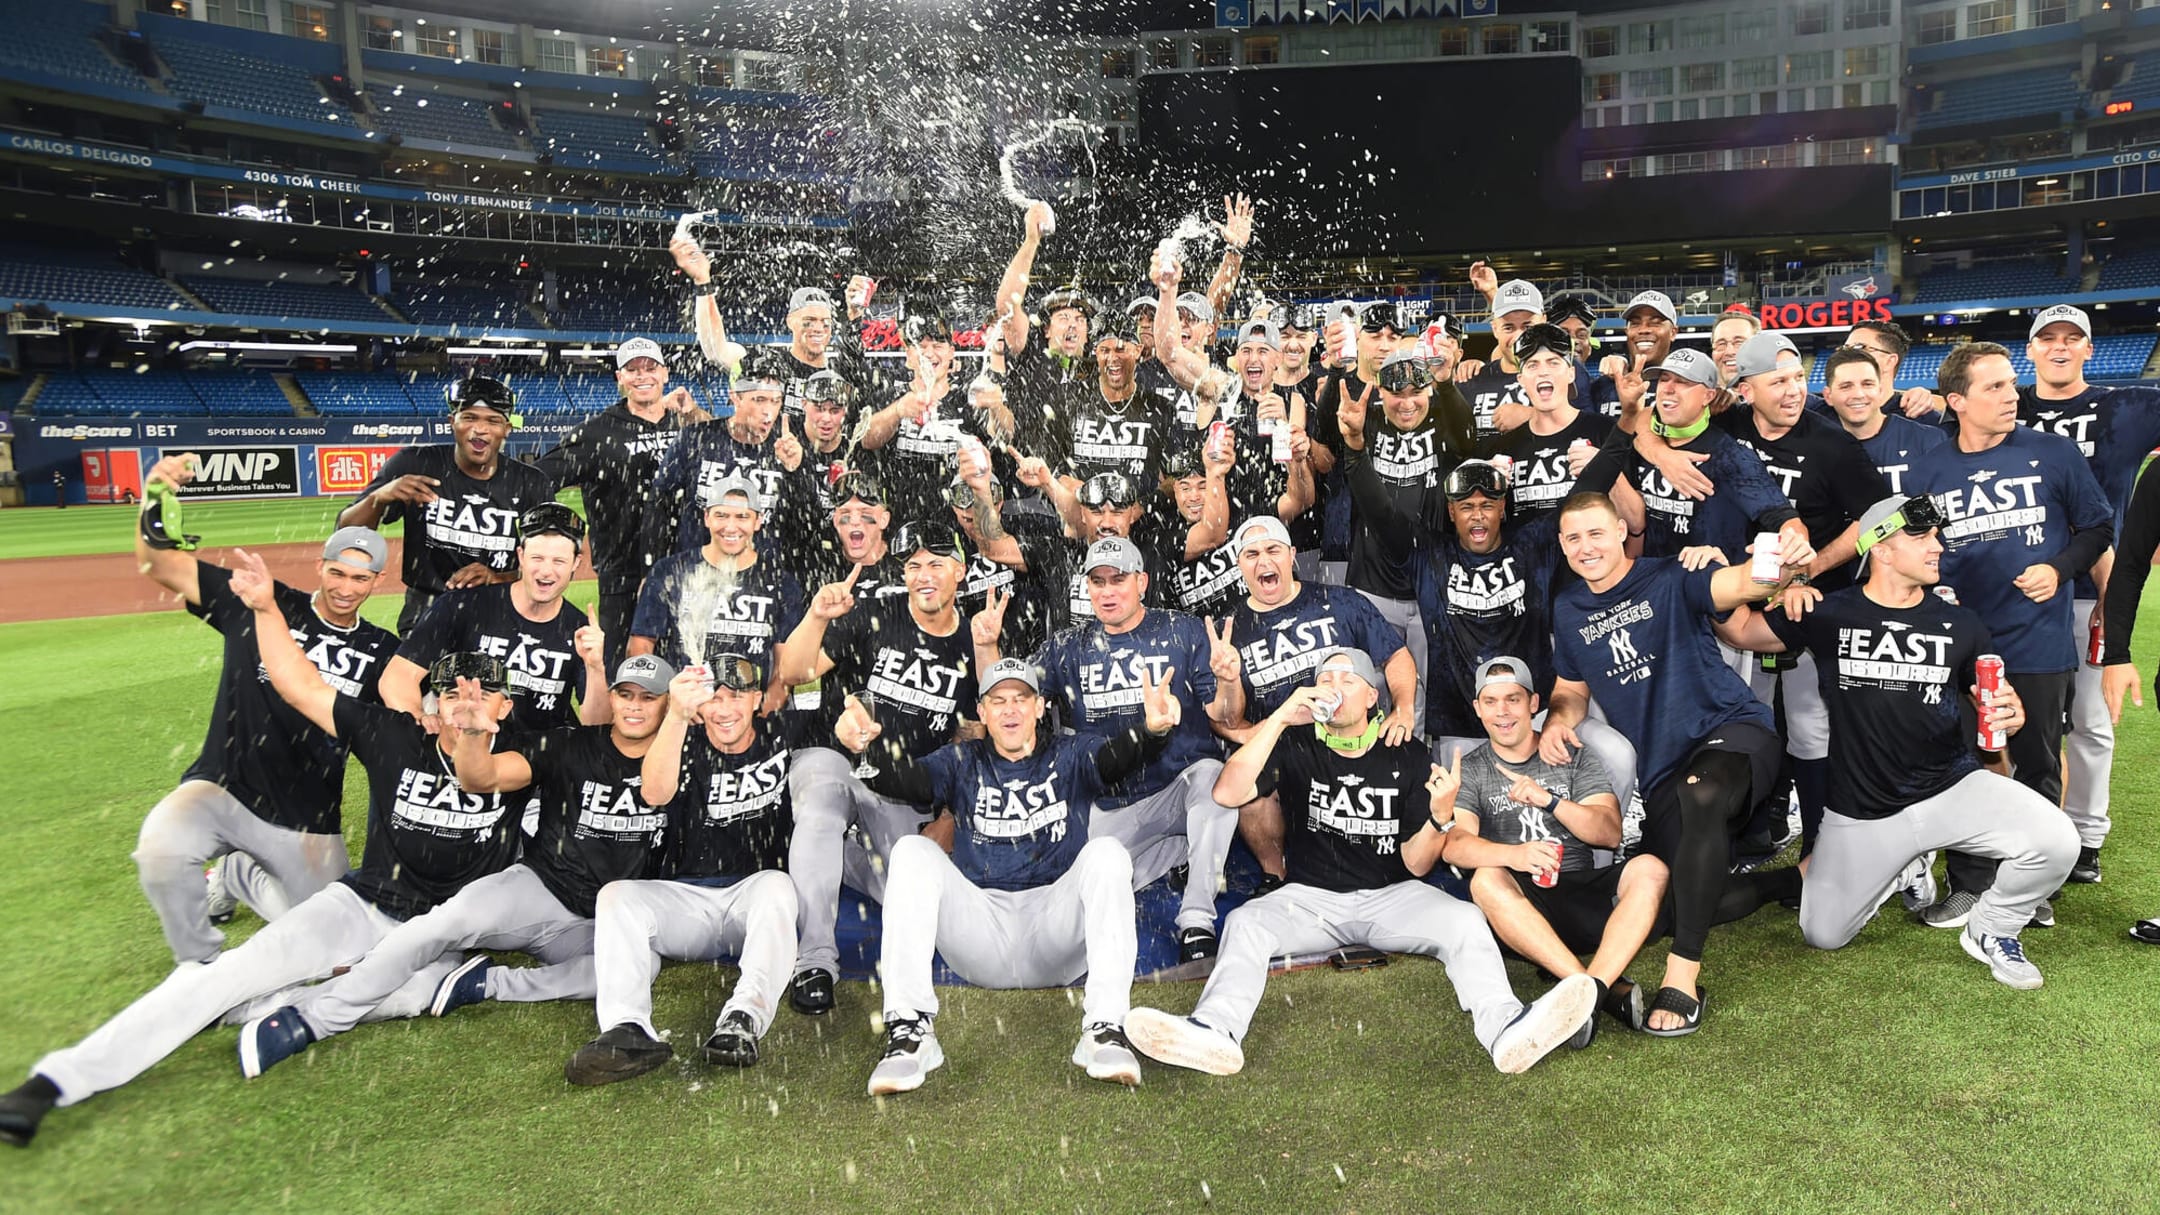 Yankees clinch AL East, finish job after 'keeping their blinders